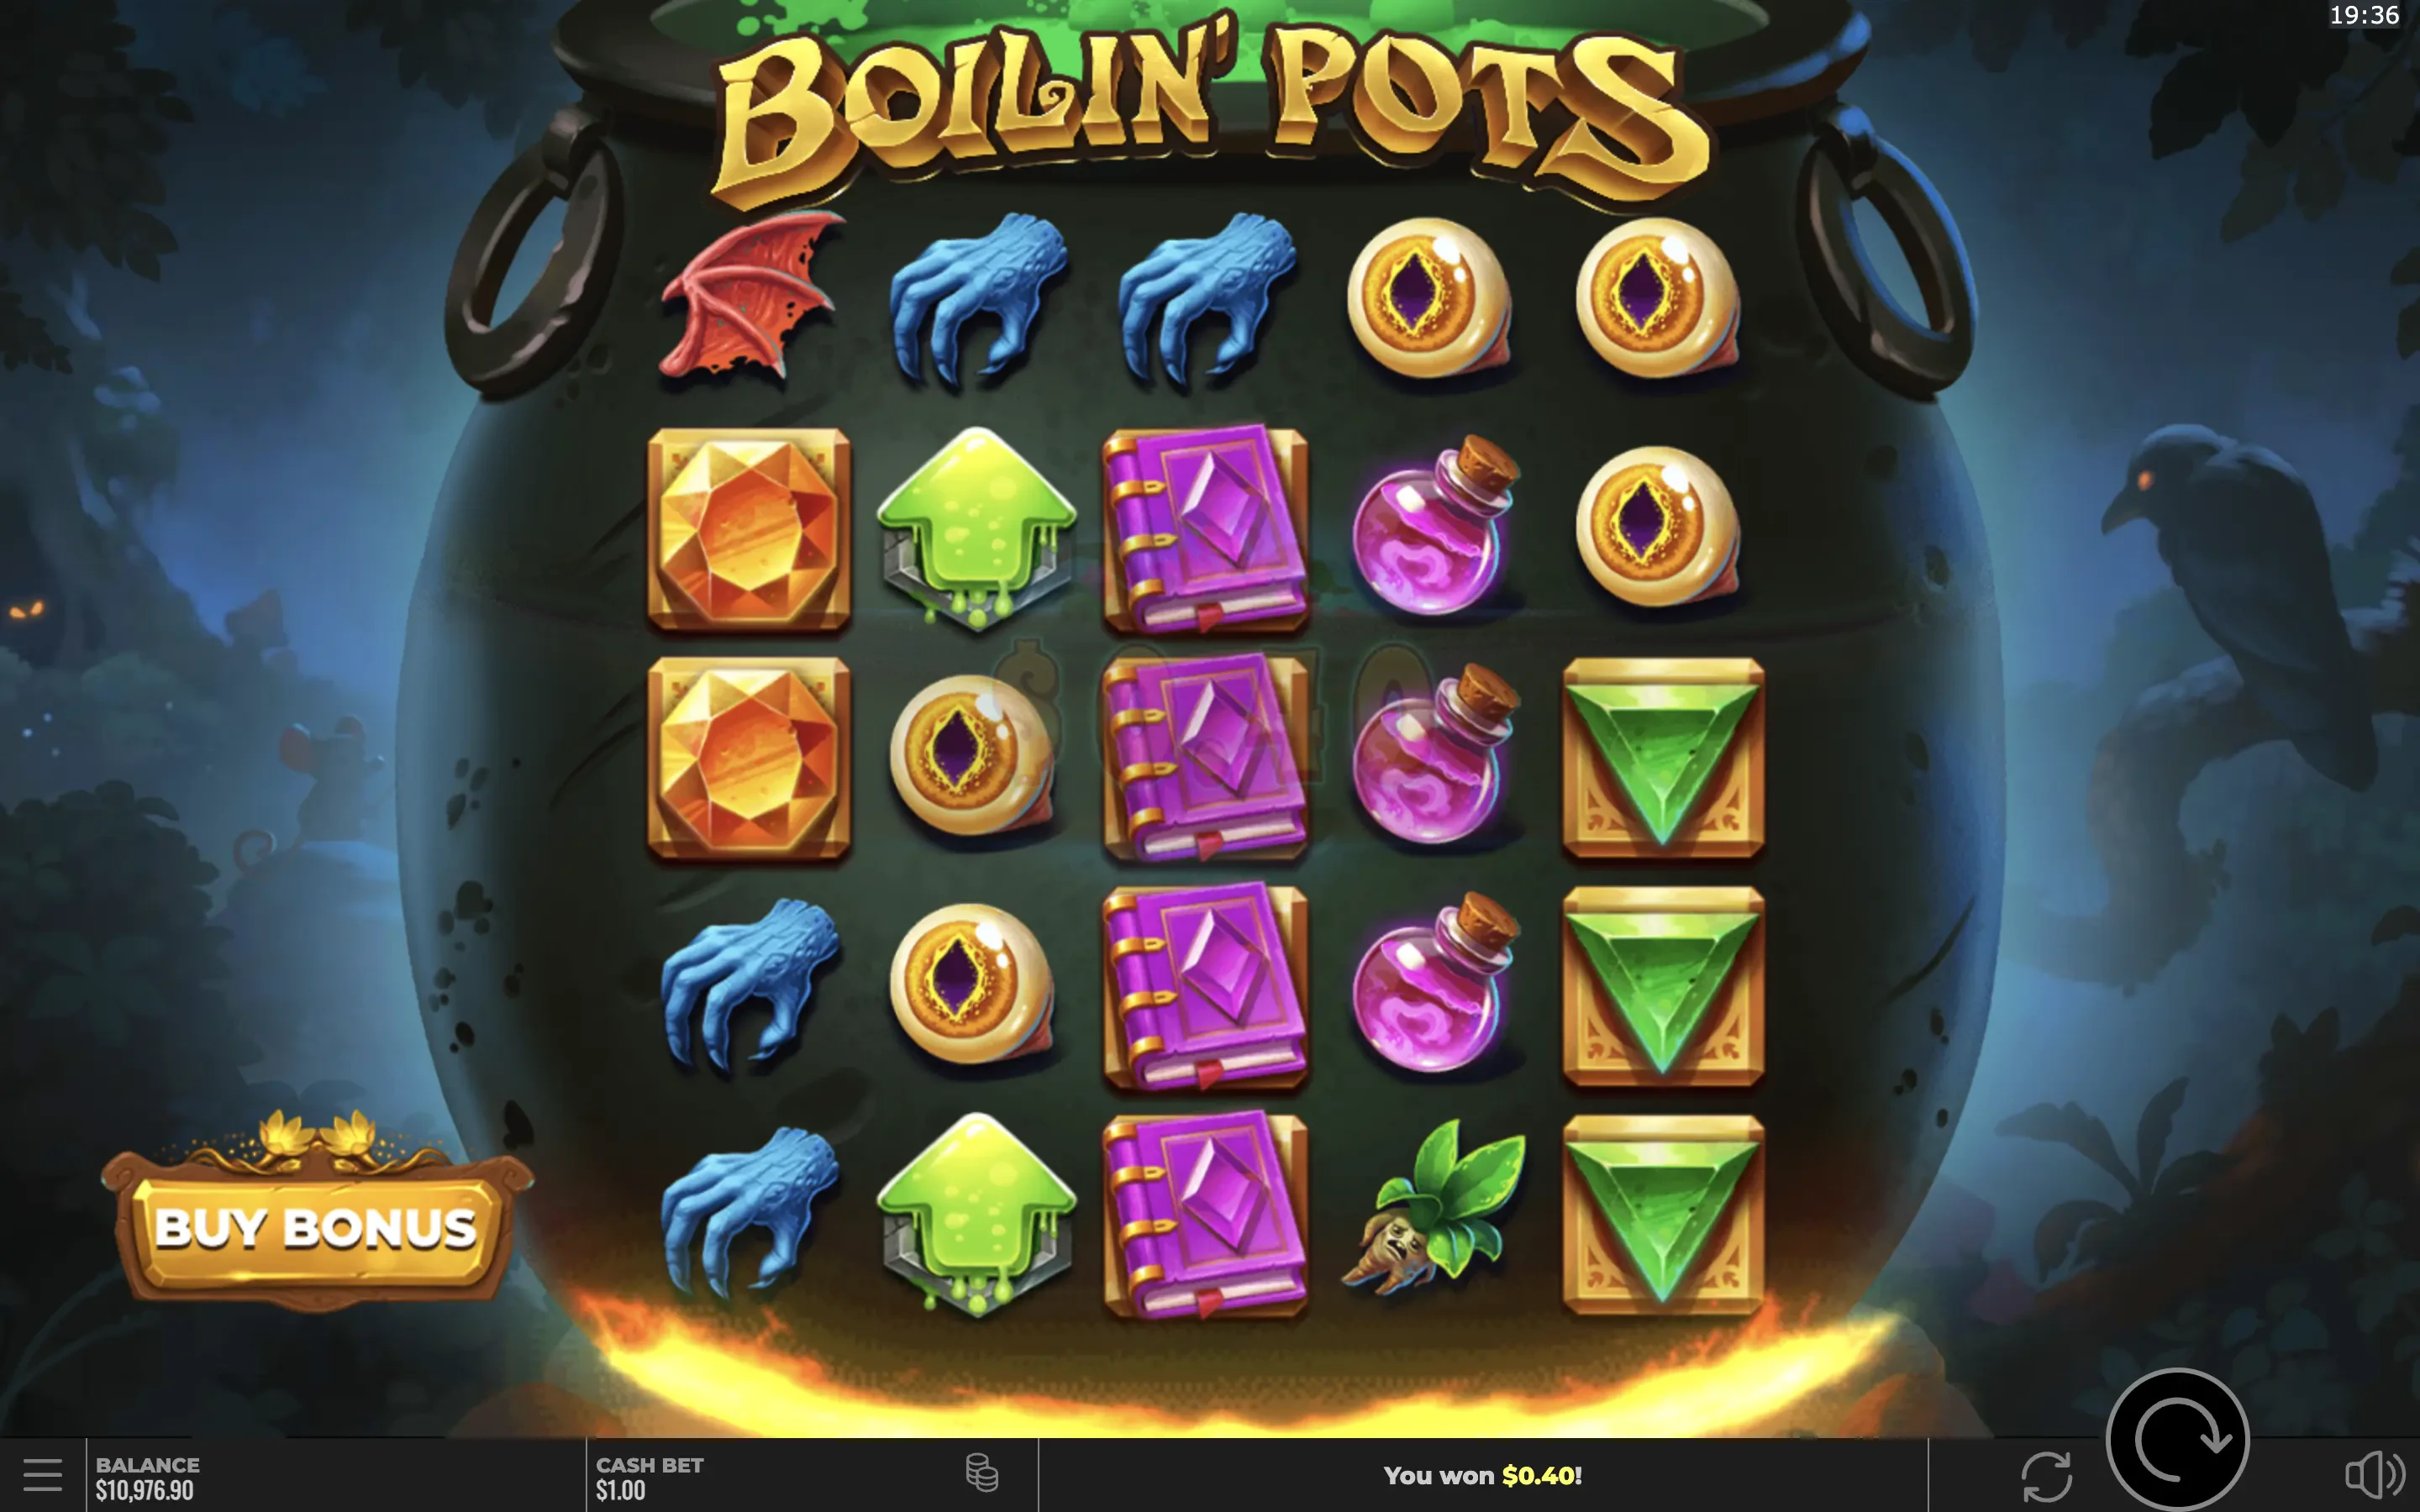 An example of a connection in Boilin' Pots